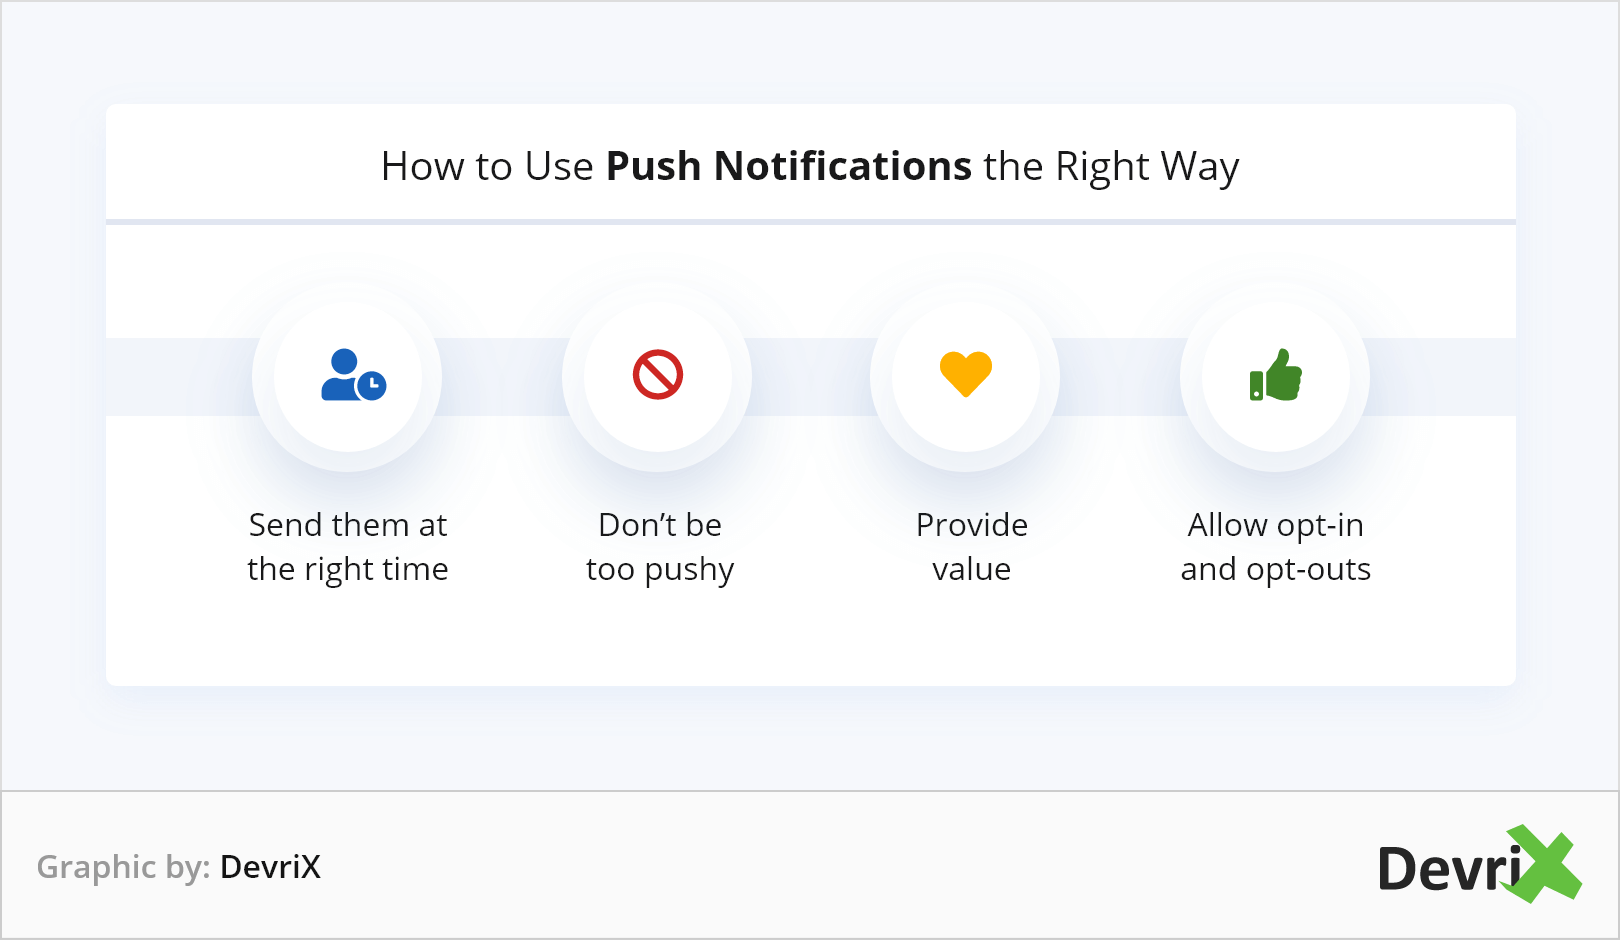 How to Use Push Notifications the Right Way